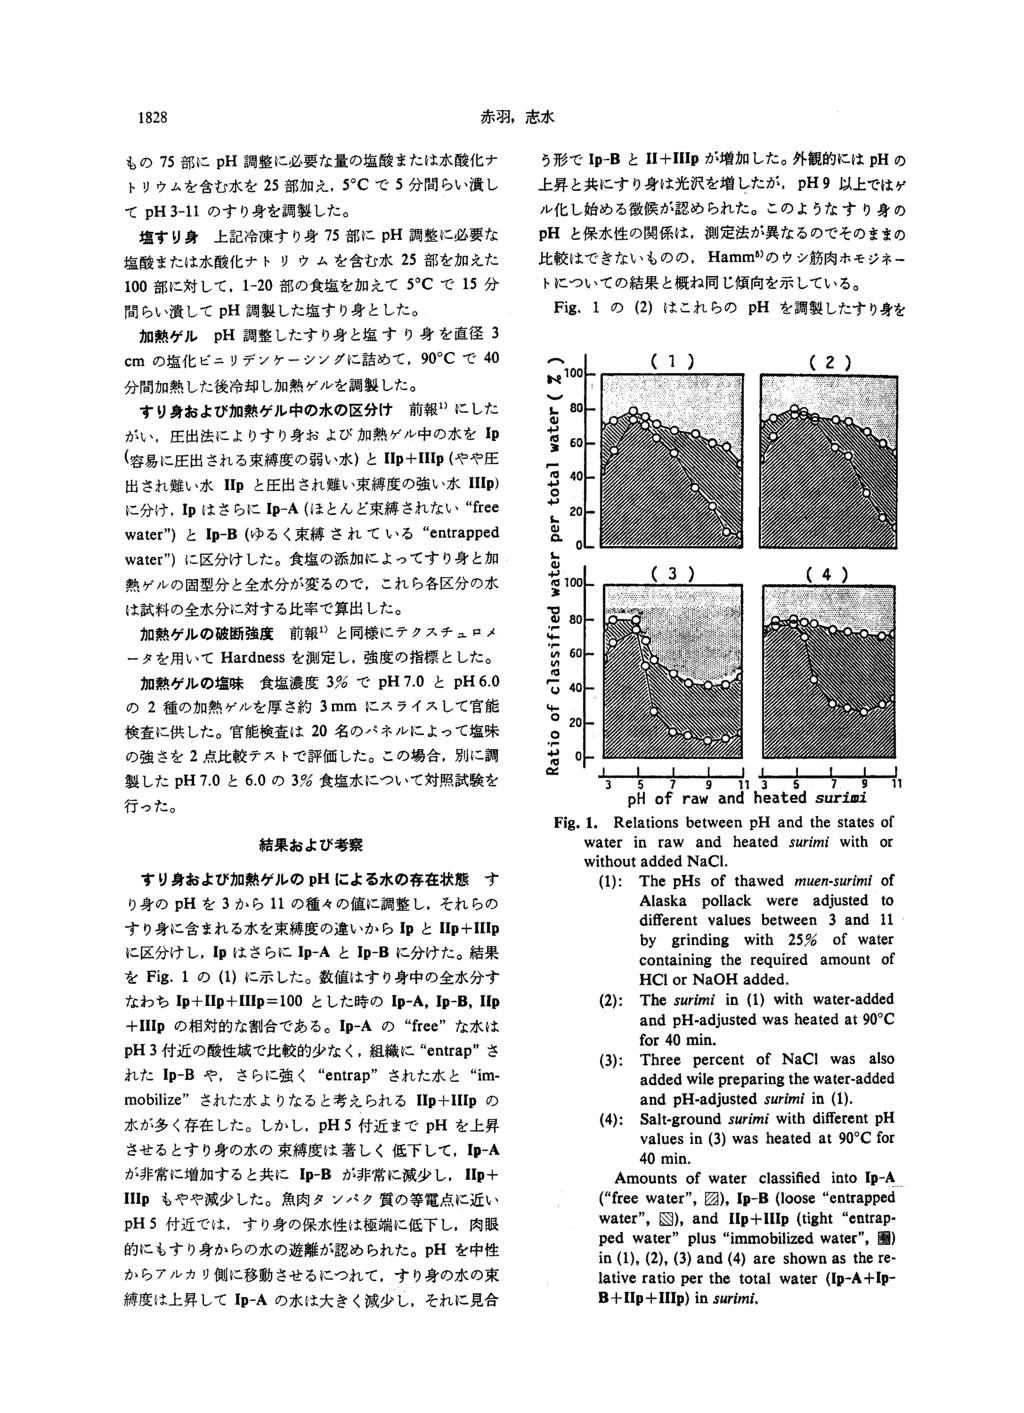 Fig. 1. Relations between ph and the states of water in raw and heated surimi with or without added NaCl.